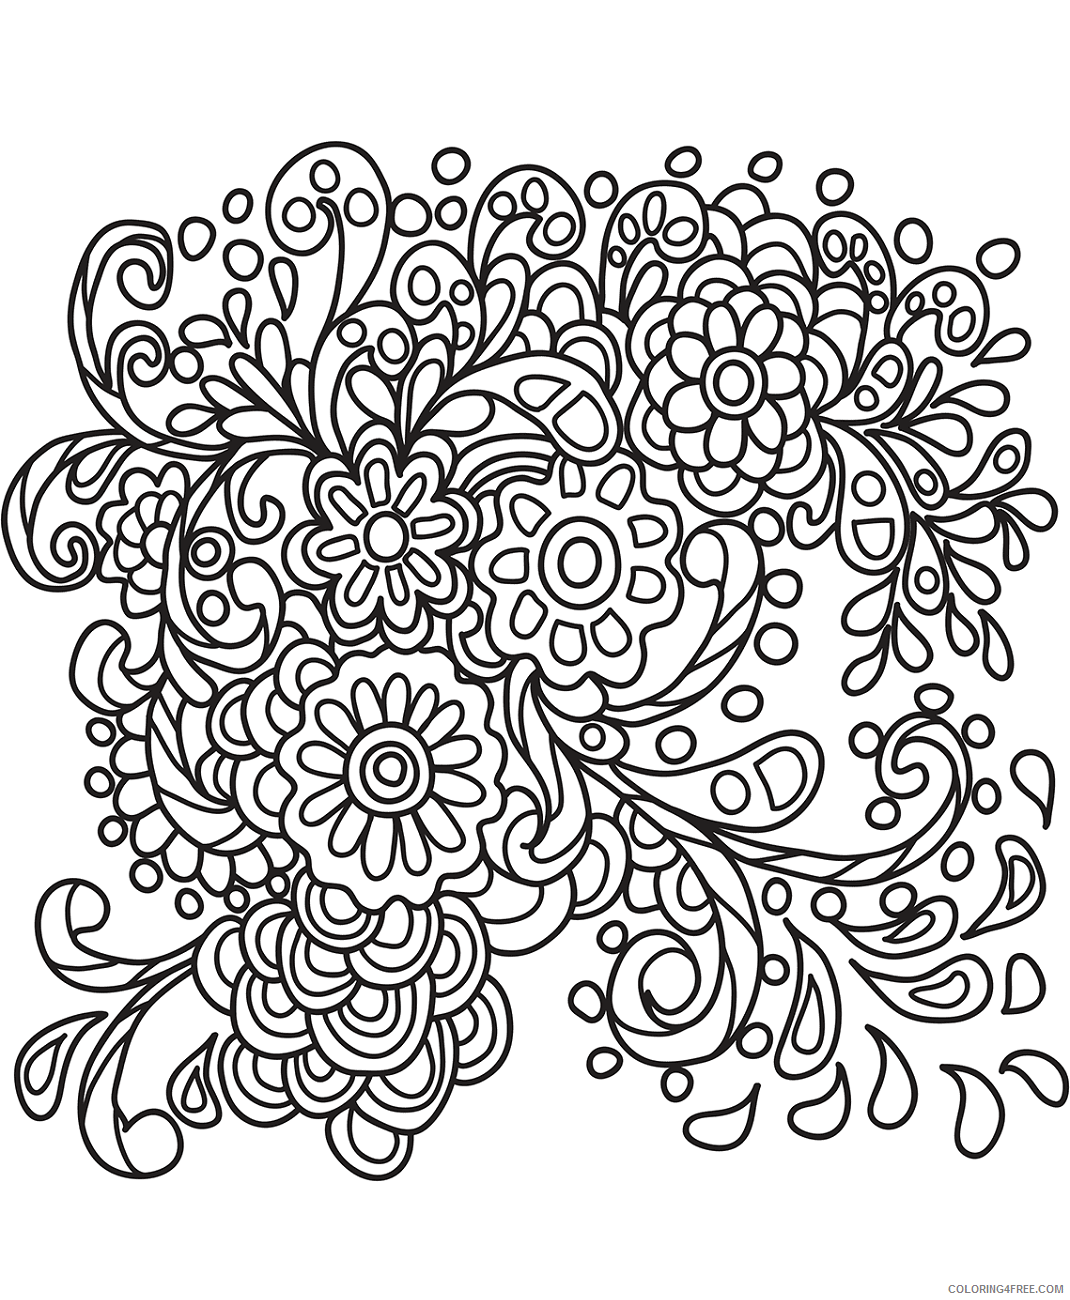 Printable Flower Coloring Pages Flowers Nature flowers doodle art Printable 2021 Coloring4free